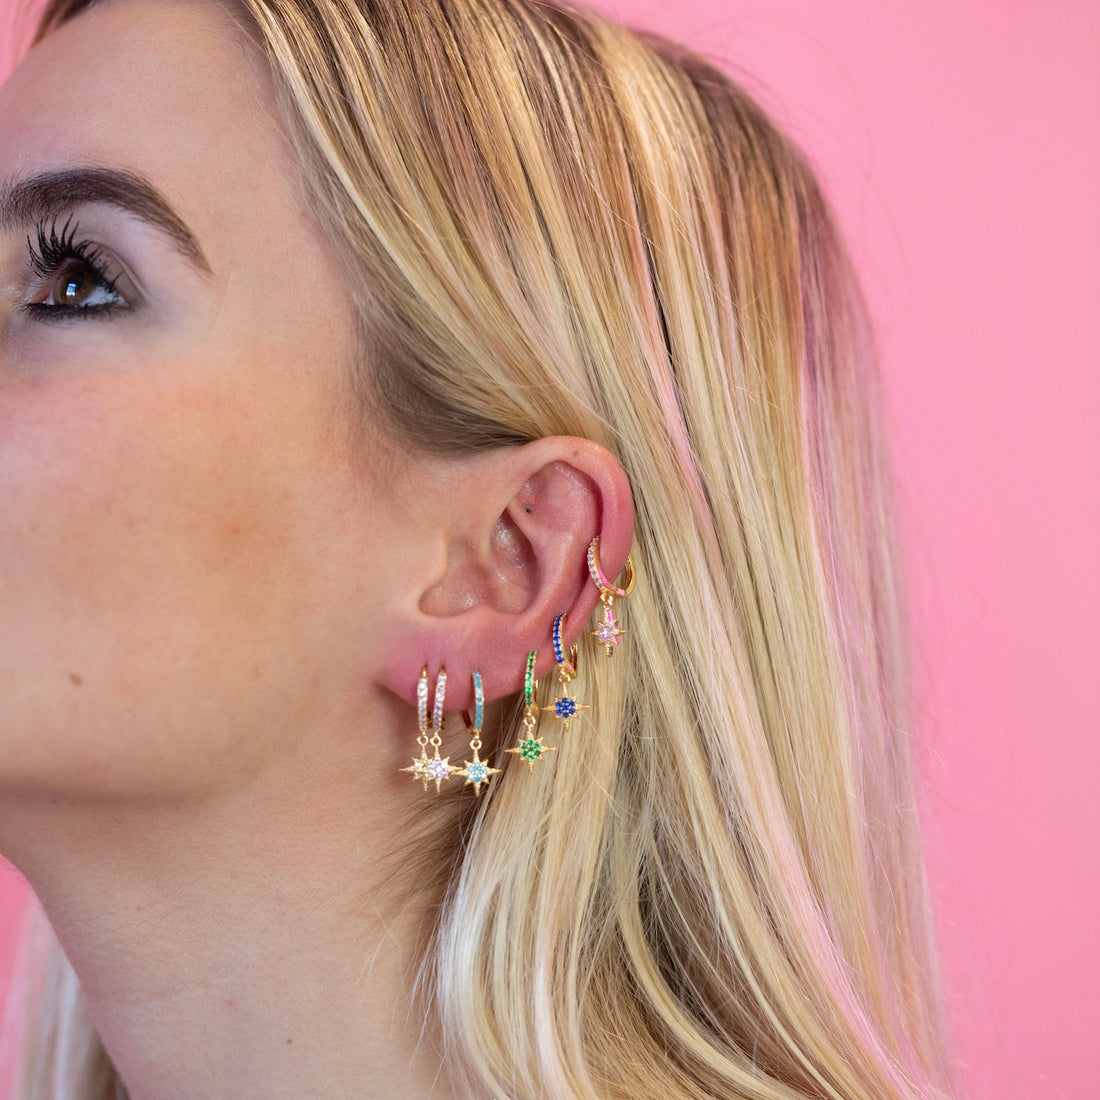 Styling Huggie Earrings for Teens and Young Adults